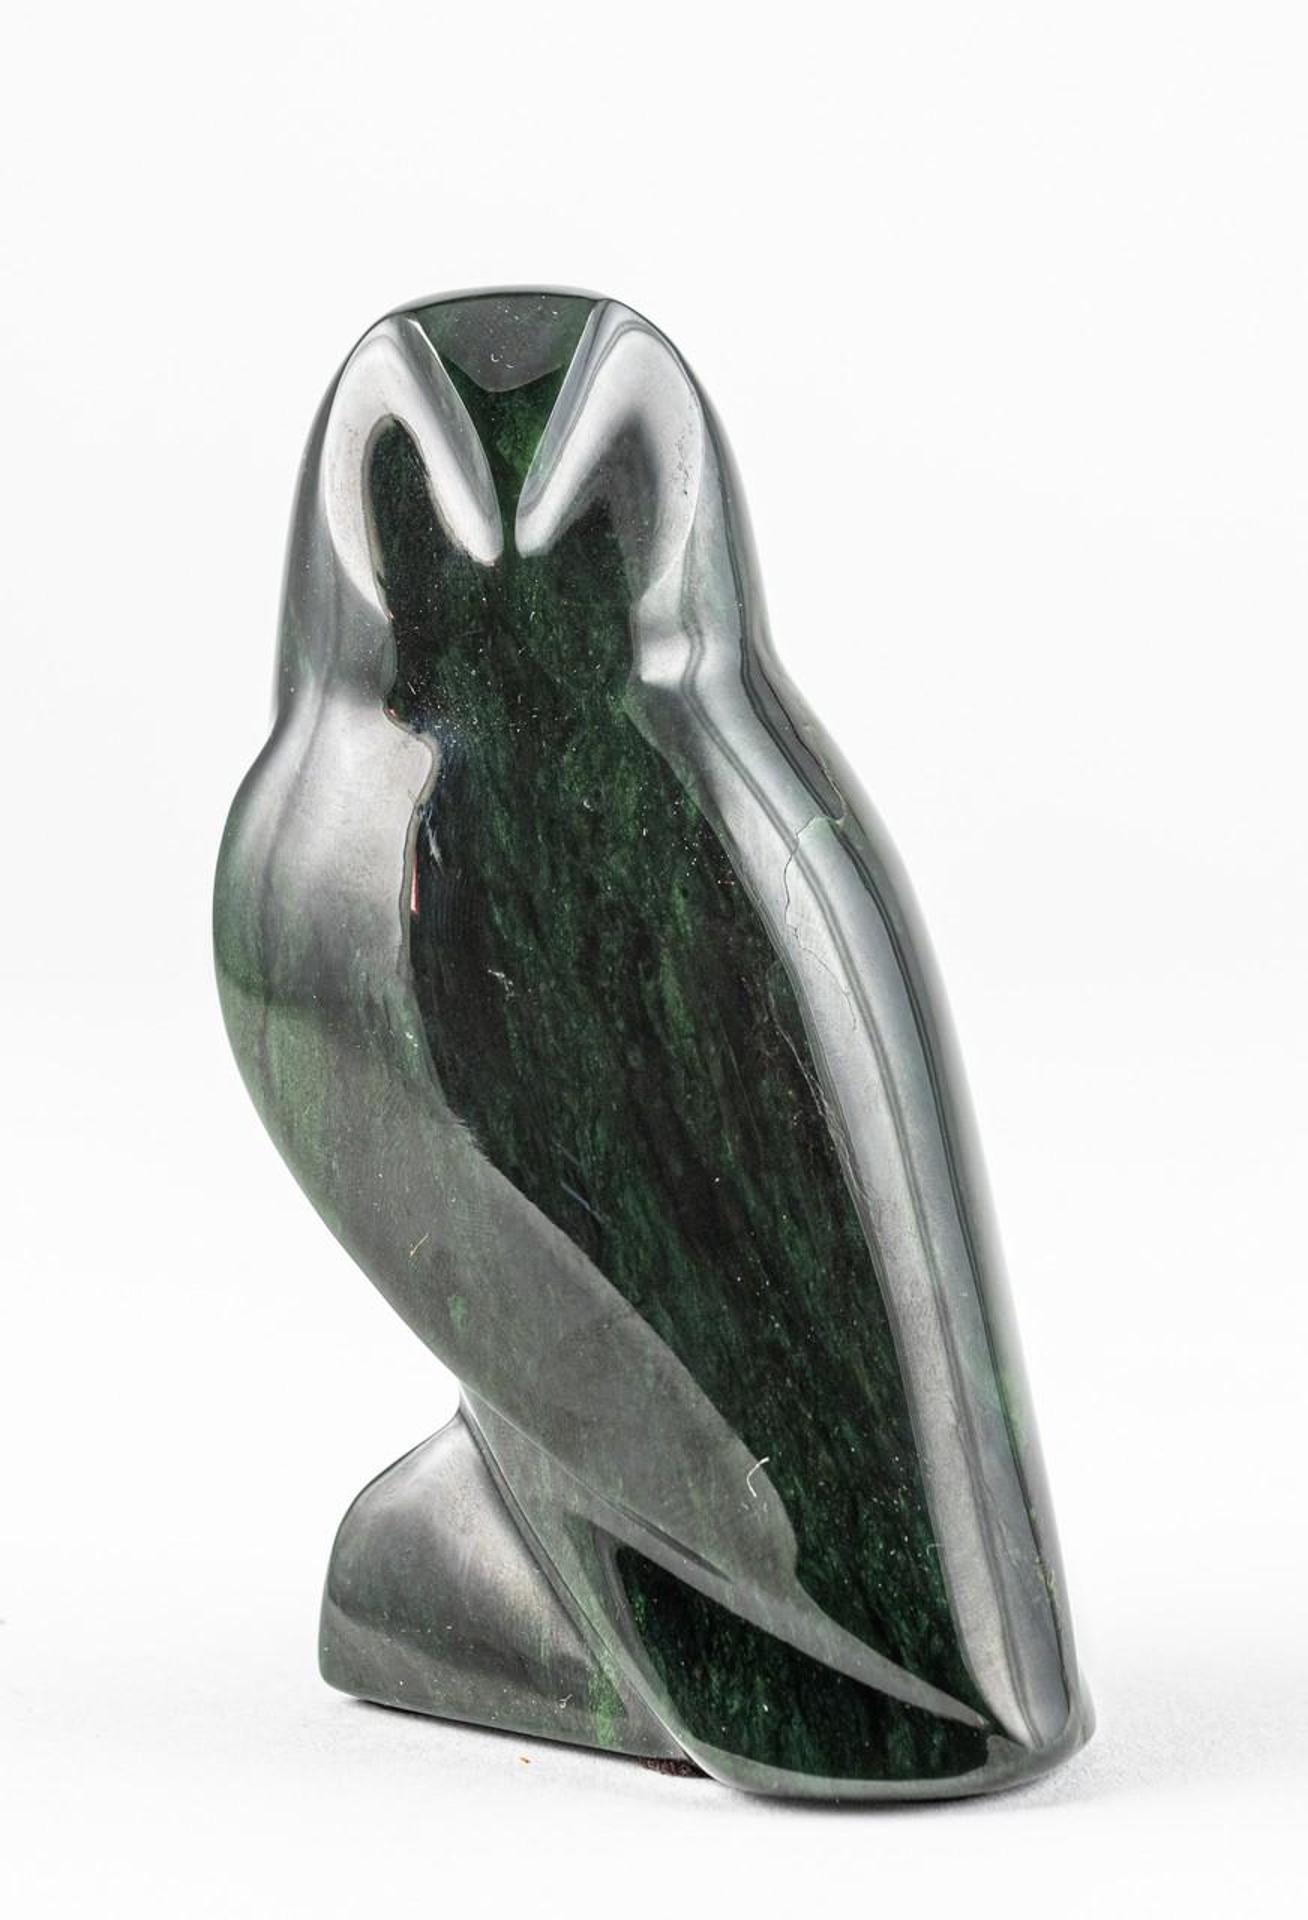 Lyle Sopel (1951) - a BC jade carving of an owl